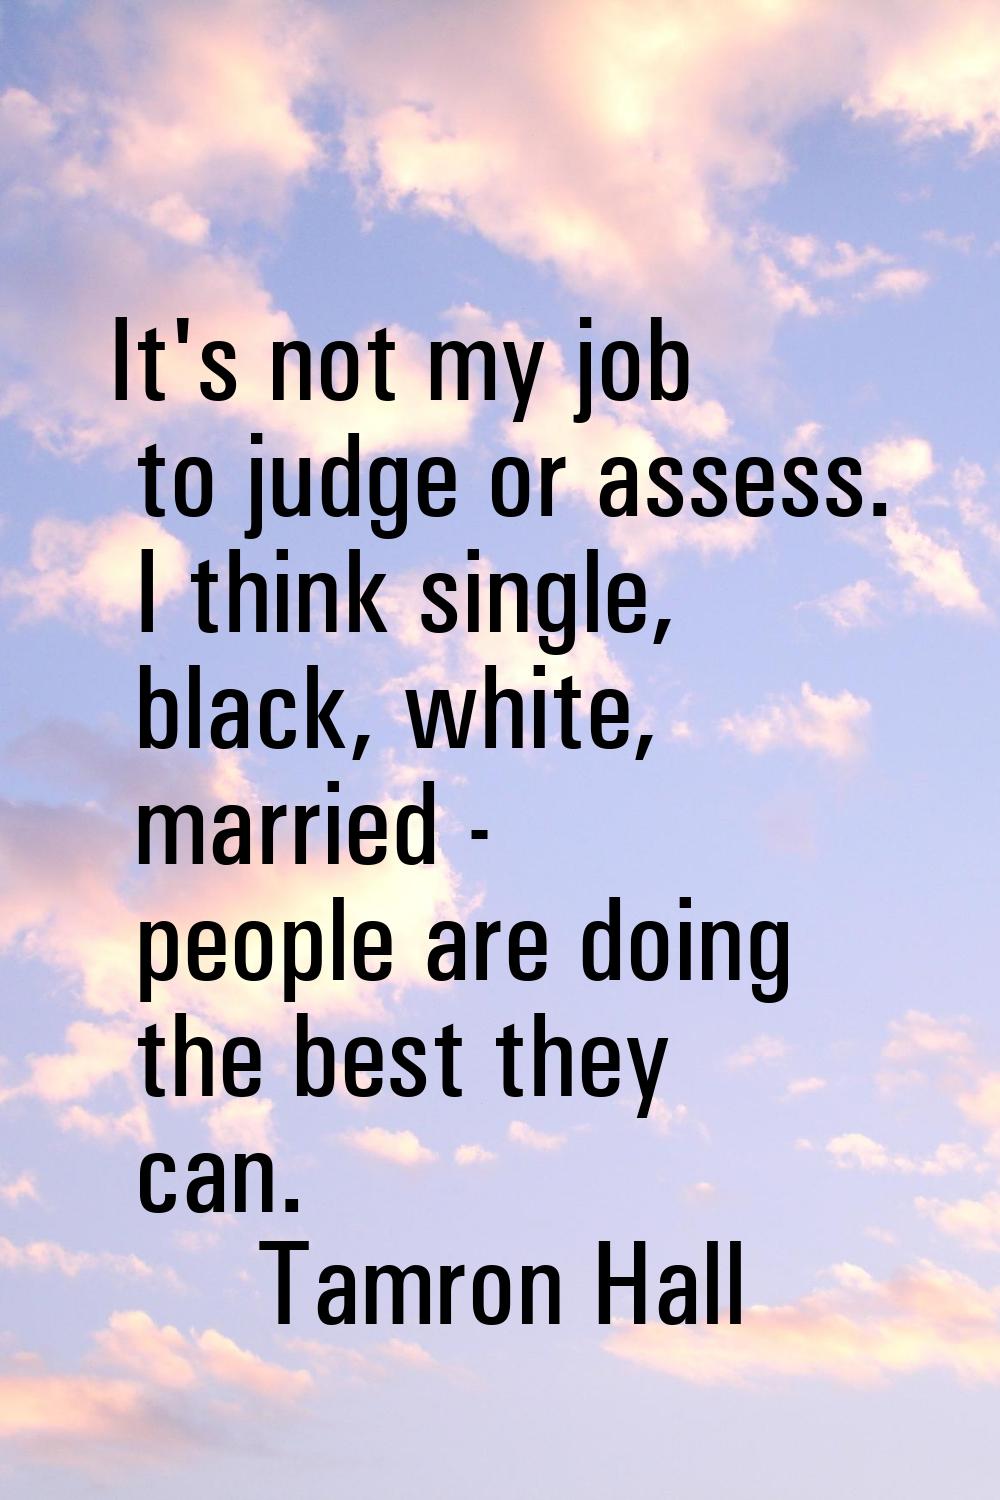 It's not my job to judge or assess. I think single, black, white, married - people are doing the be